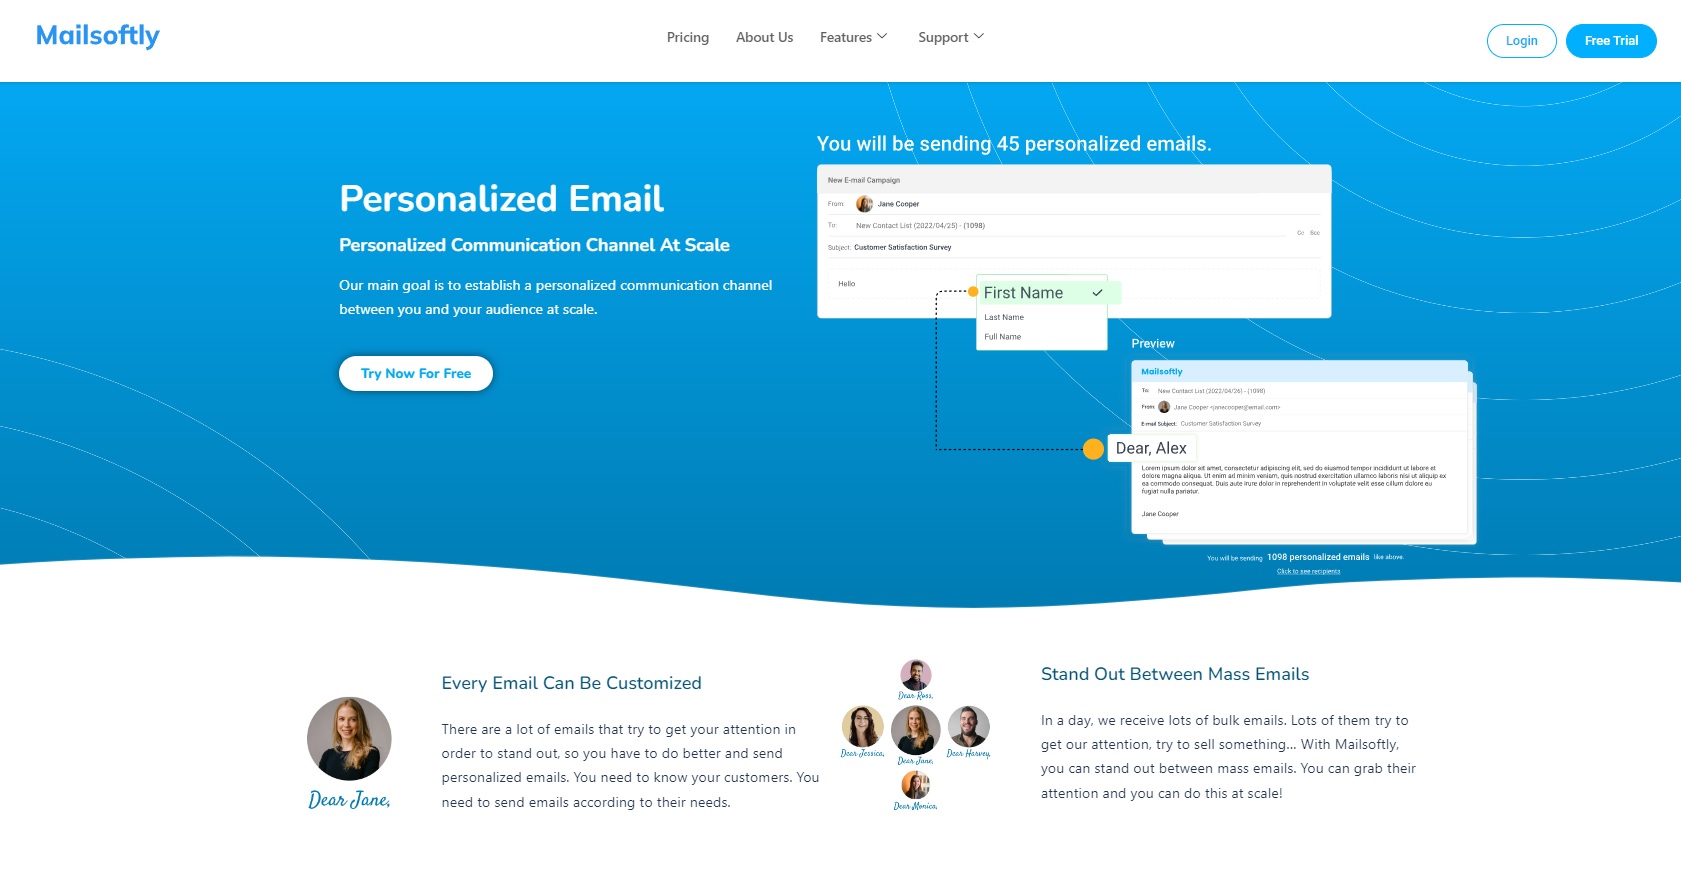 Mailsoftly email personalization